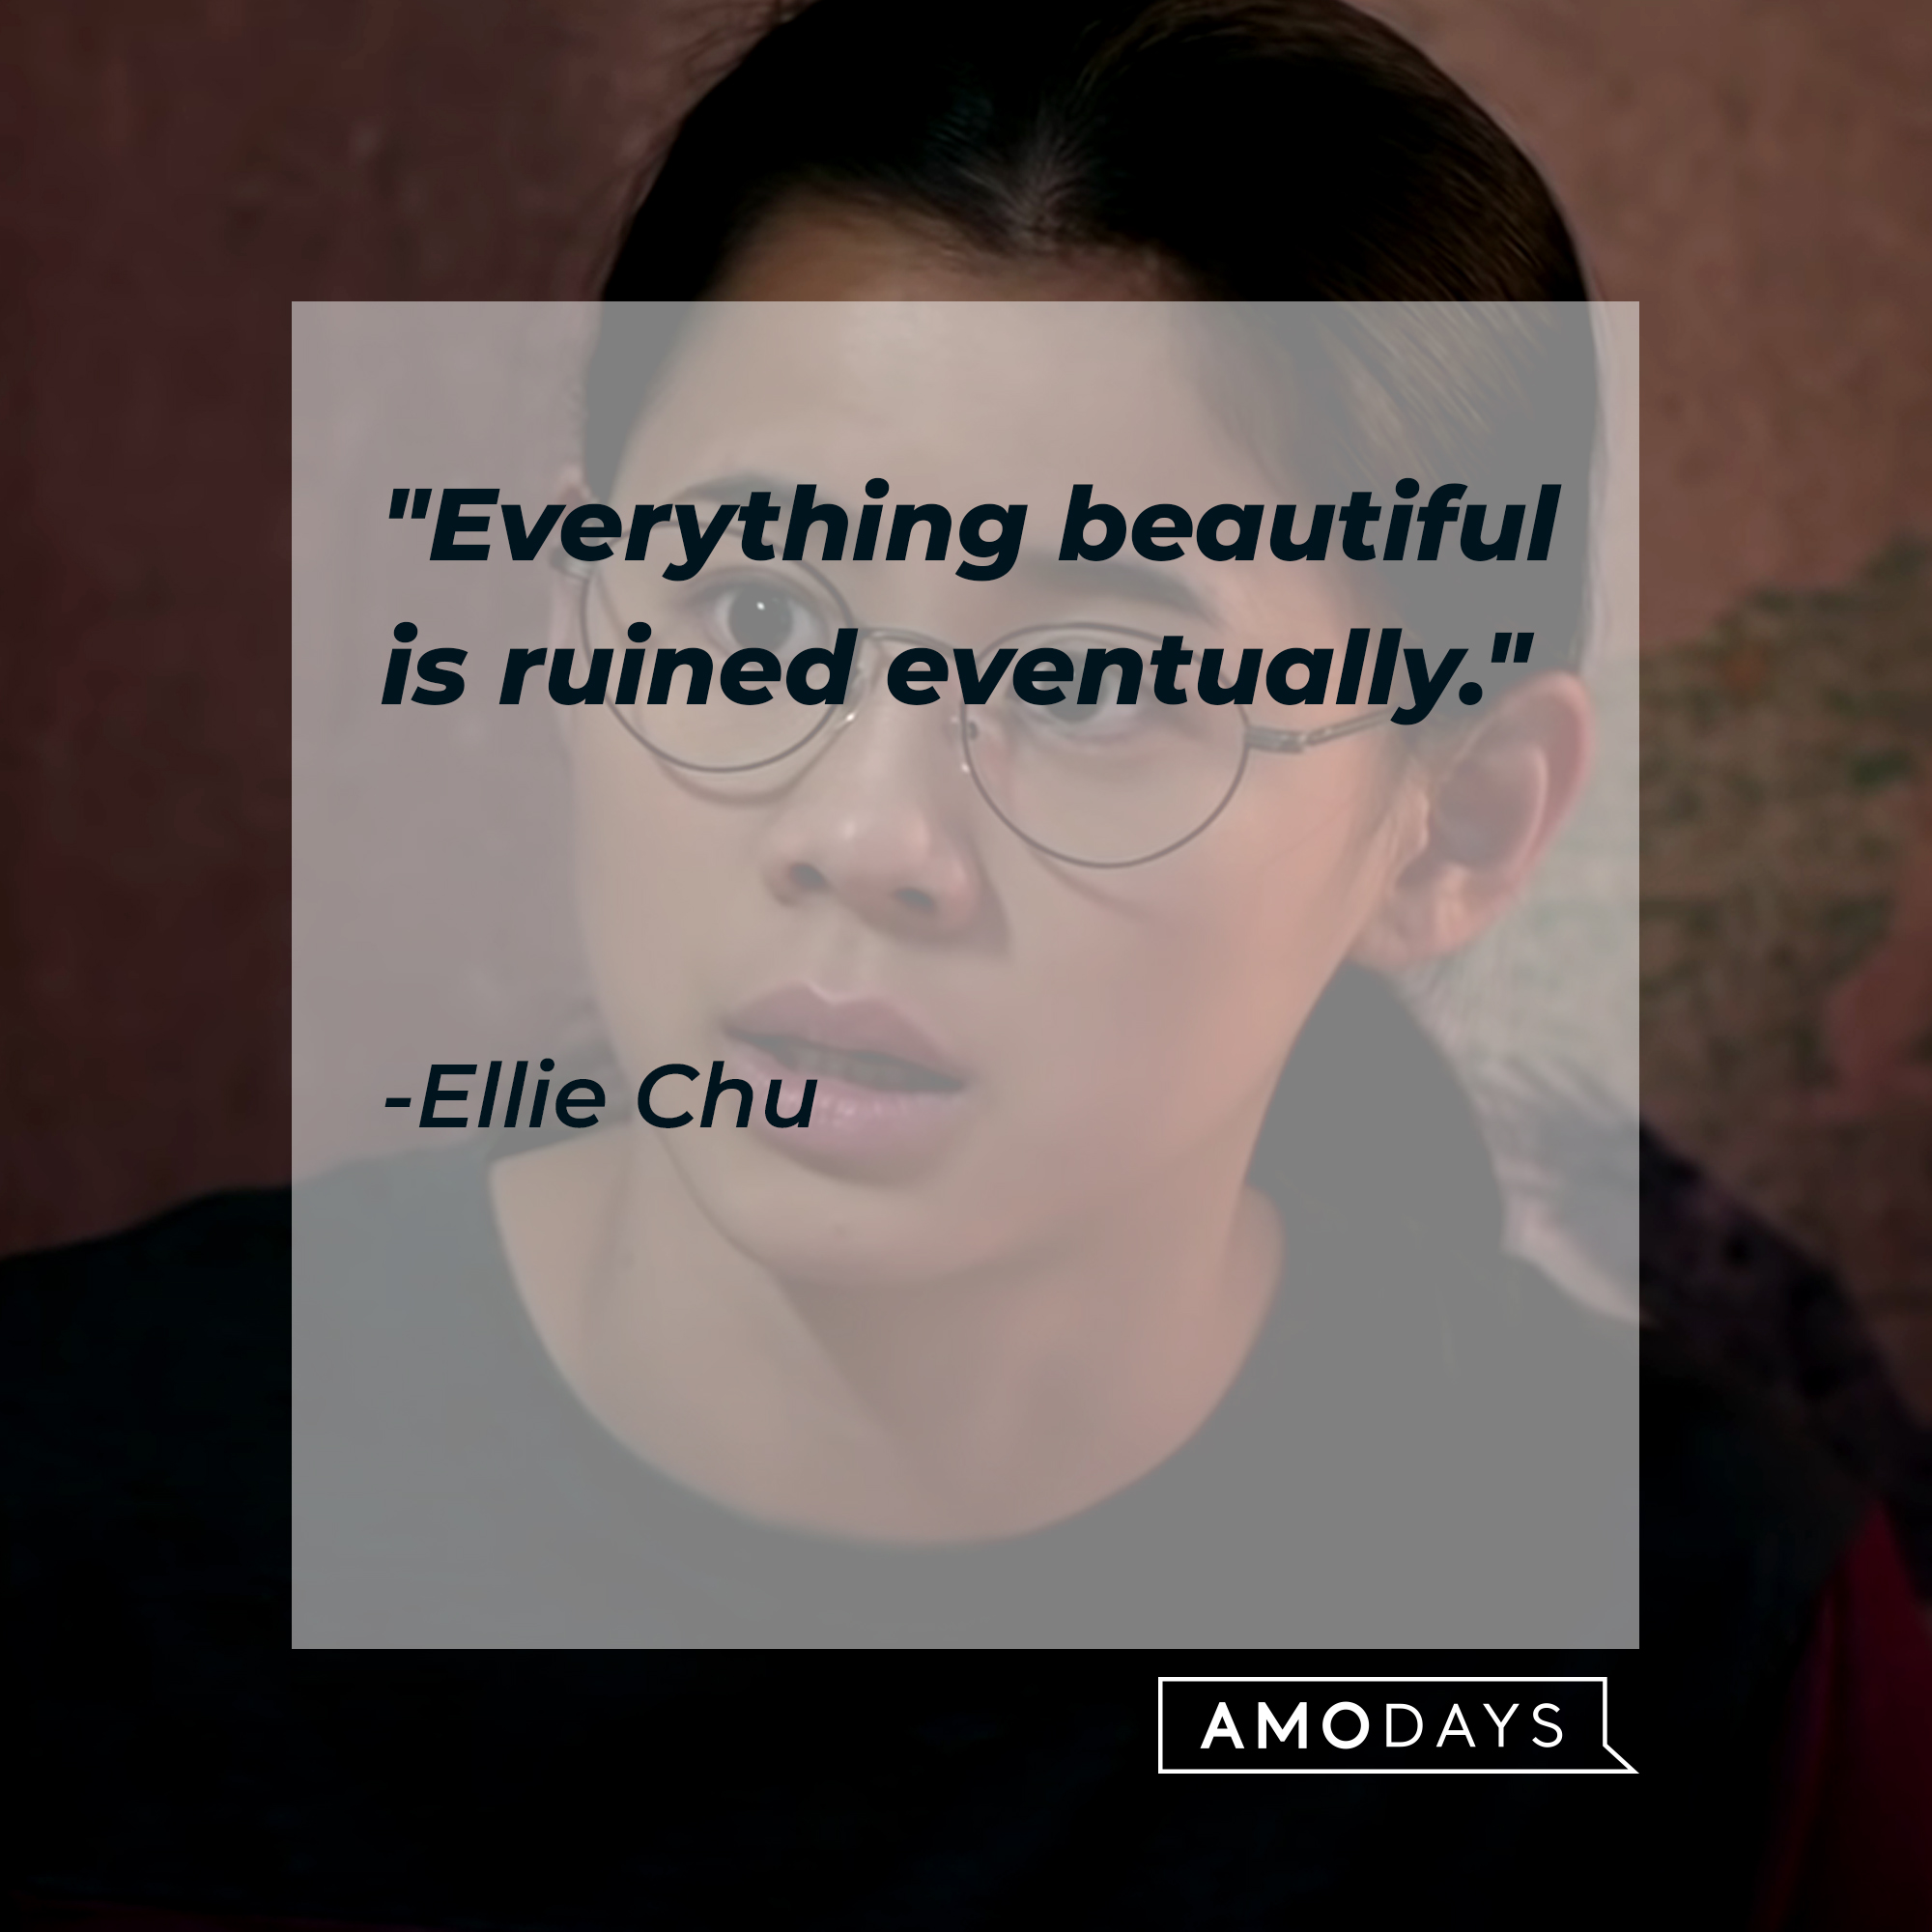 Ellie Chu's quote, "Everything beautiful is ruined eventually." | Image: youtube.com/Netflix